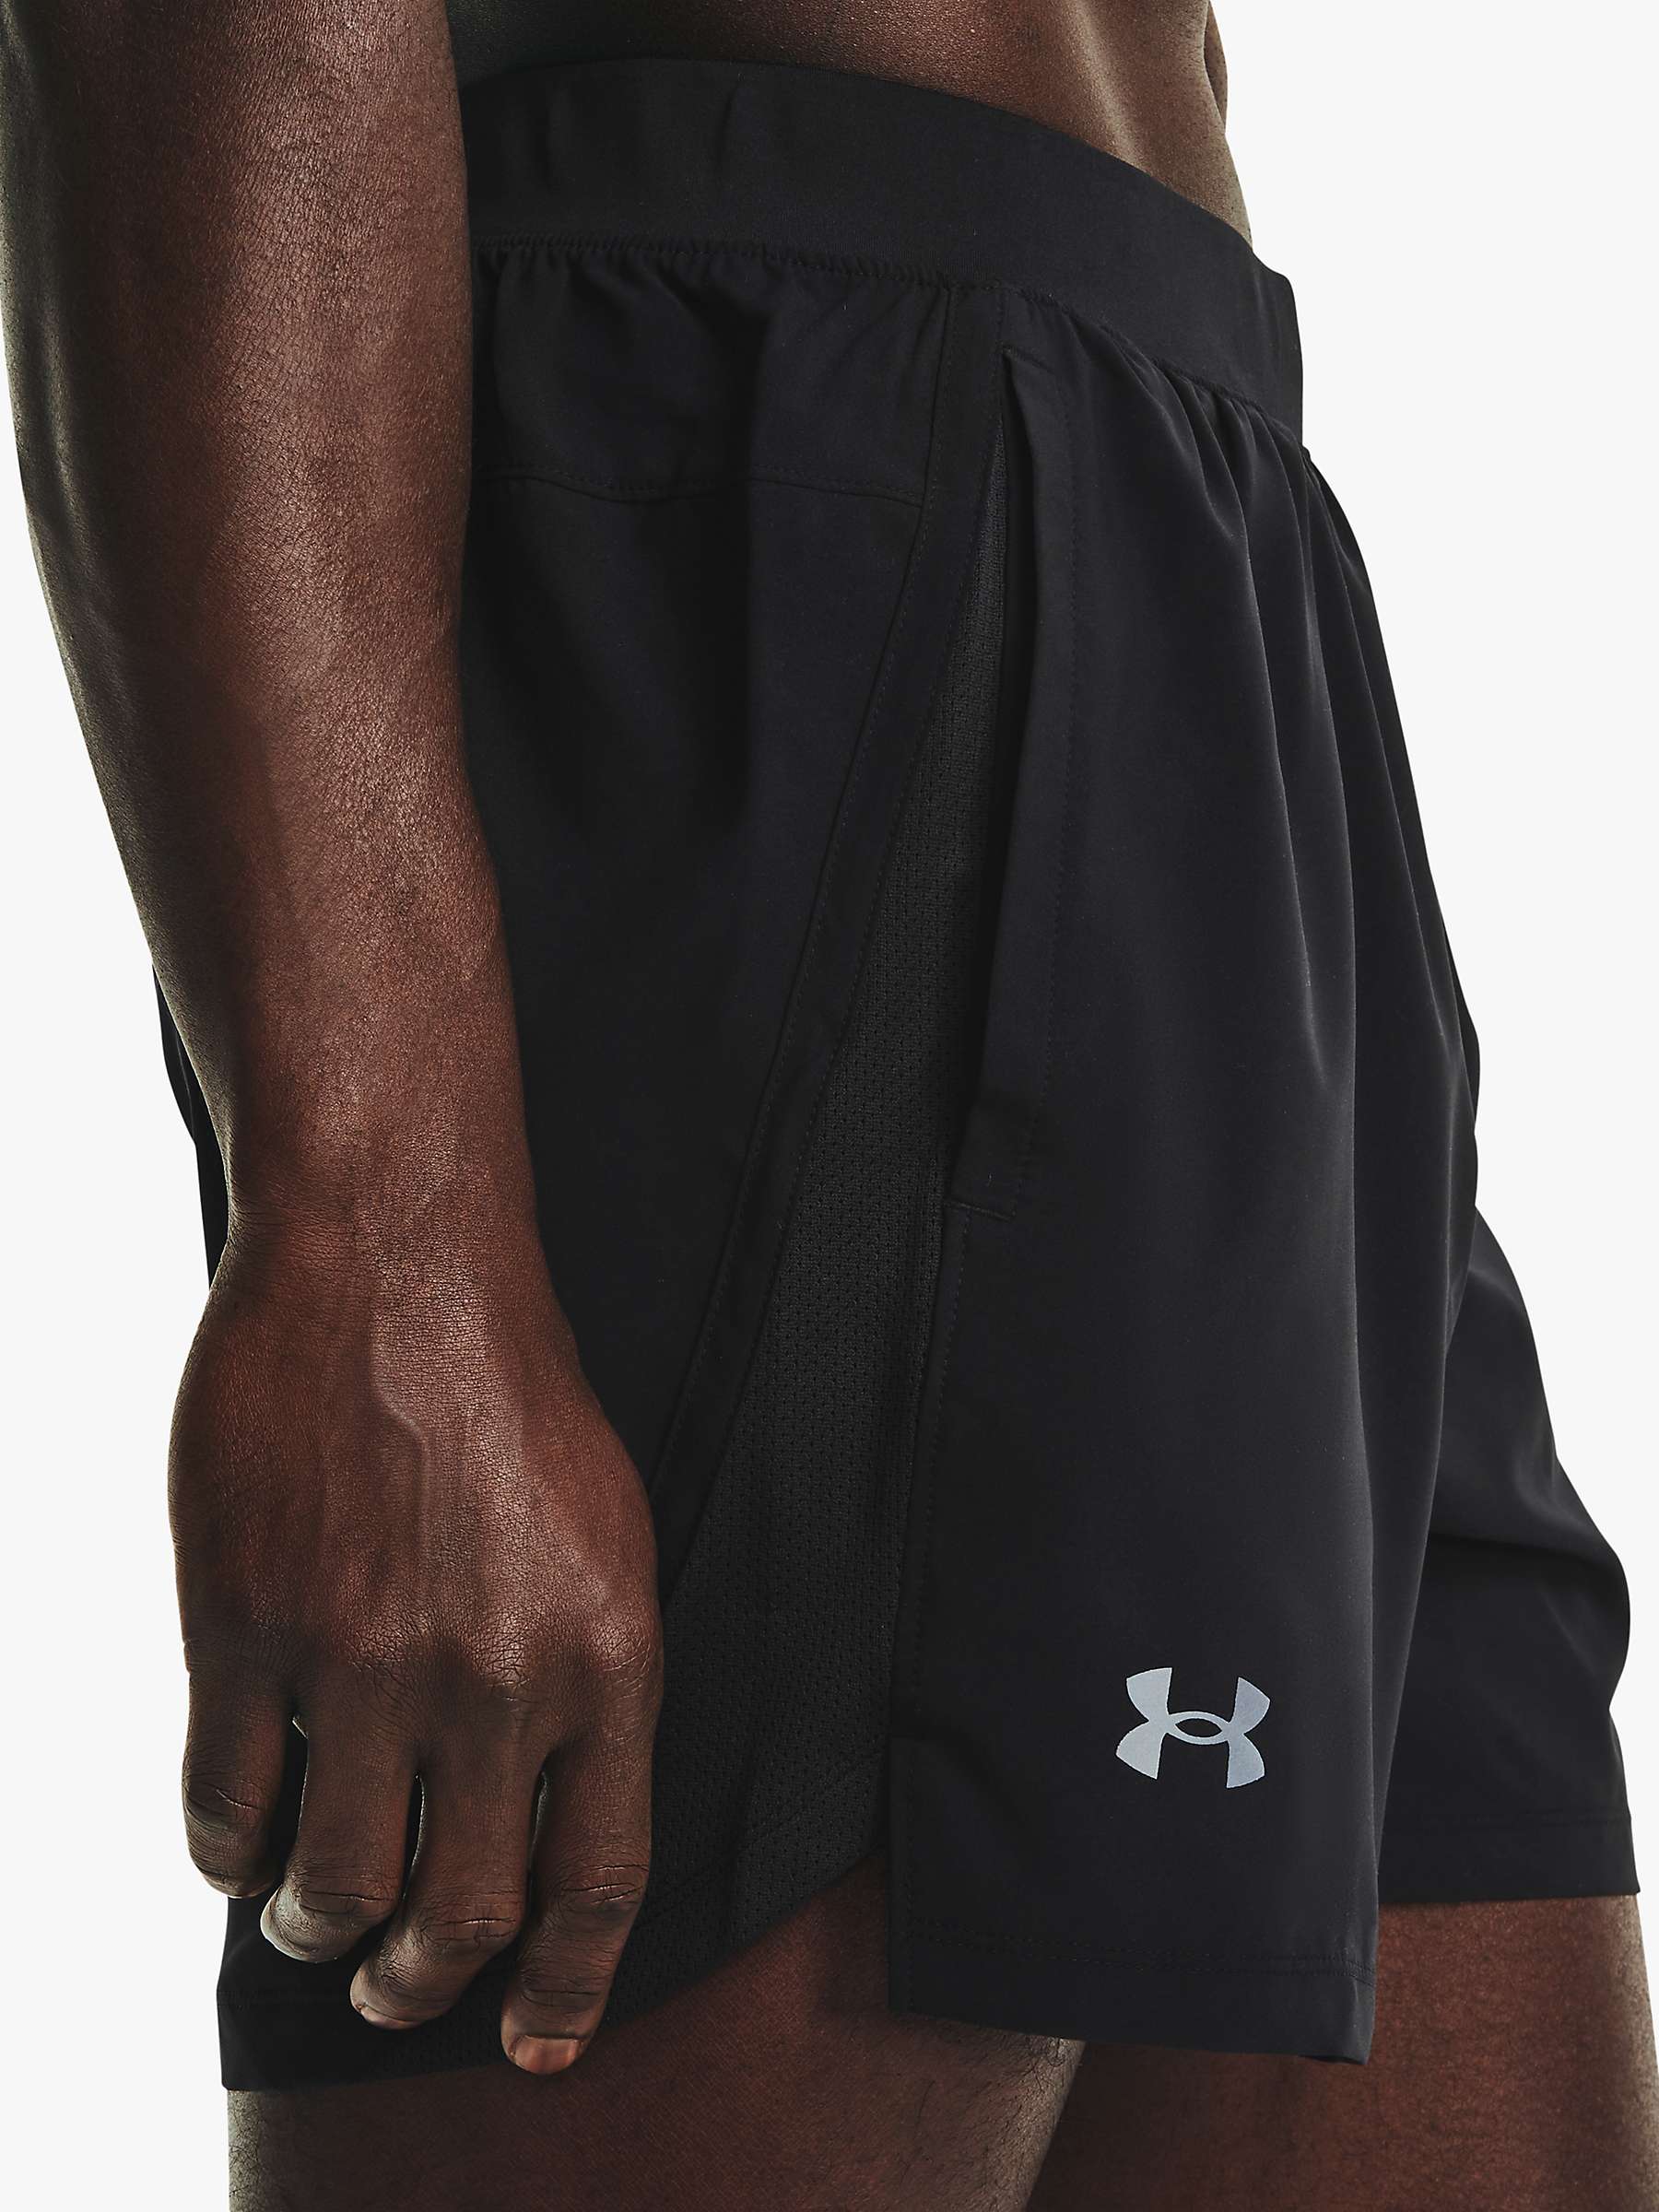 Under Armour Mens Launch sw 5 Shorts 